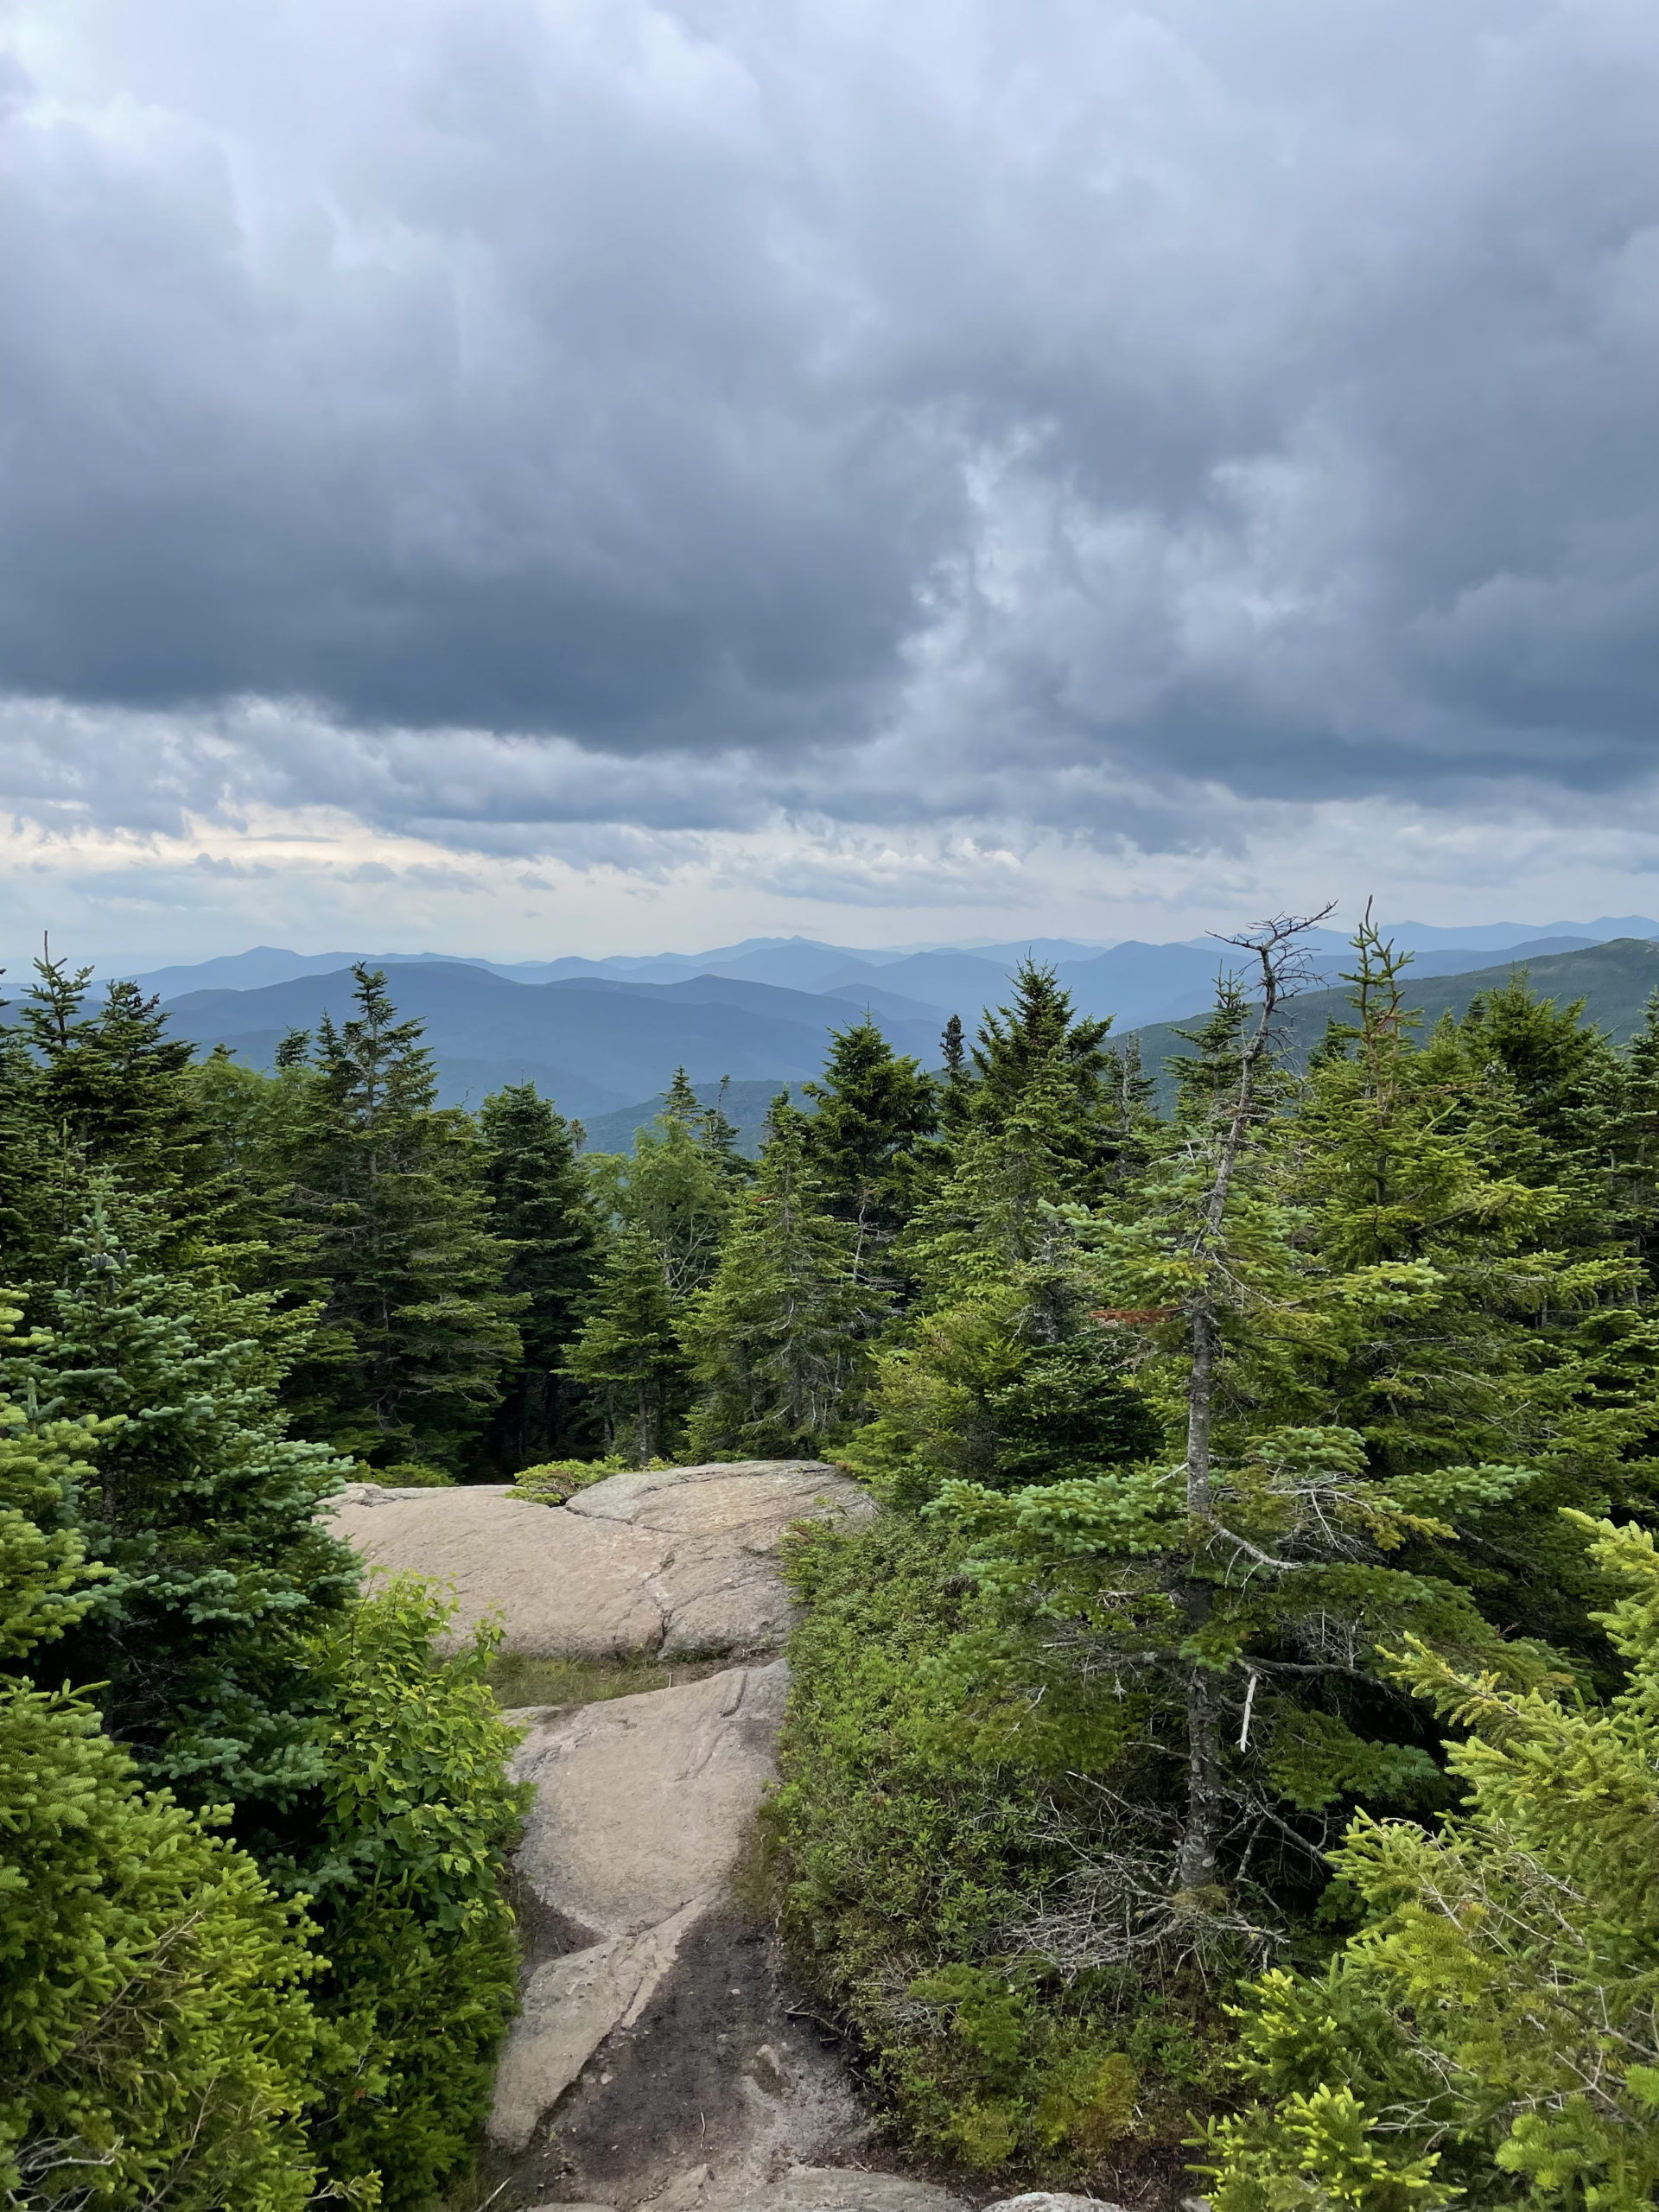 Views over rocks, seen while hiking Mt. Pierce and Mt. Jackson in the White Mountains National Forest, New Hampshire